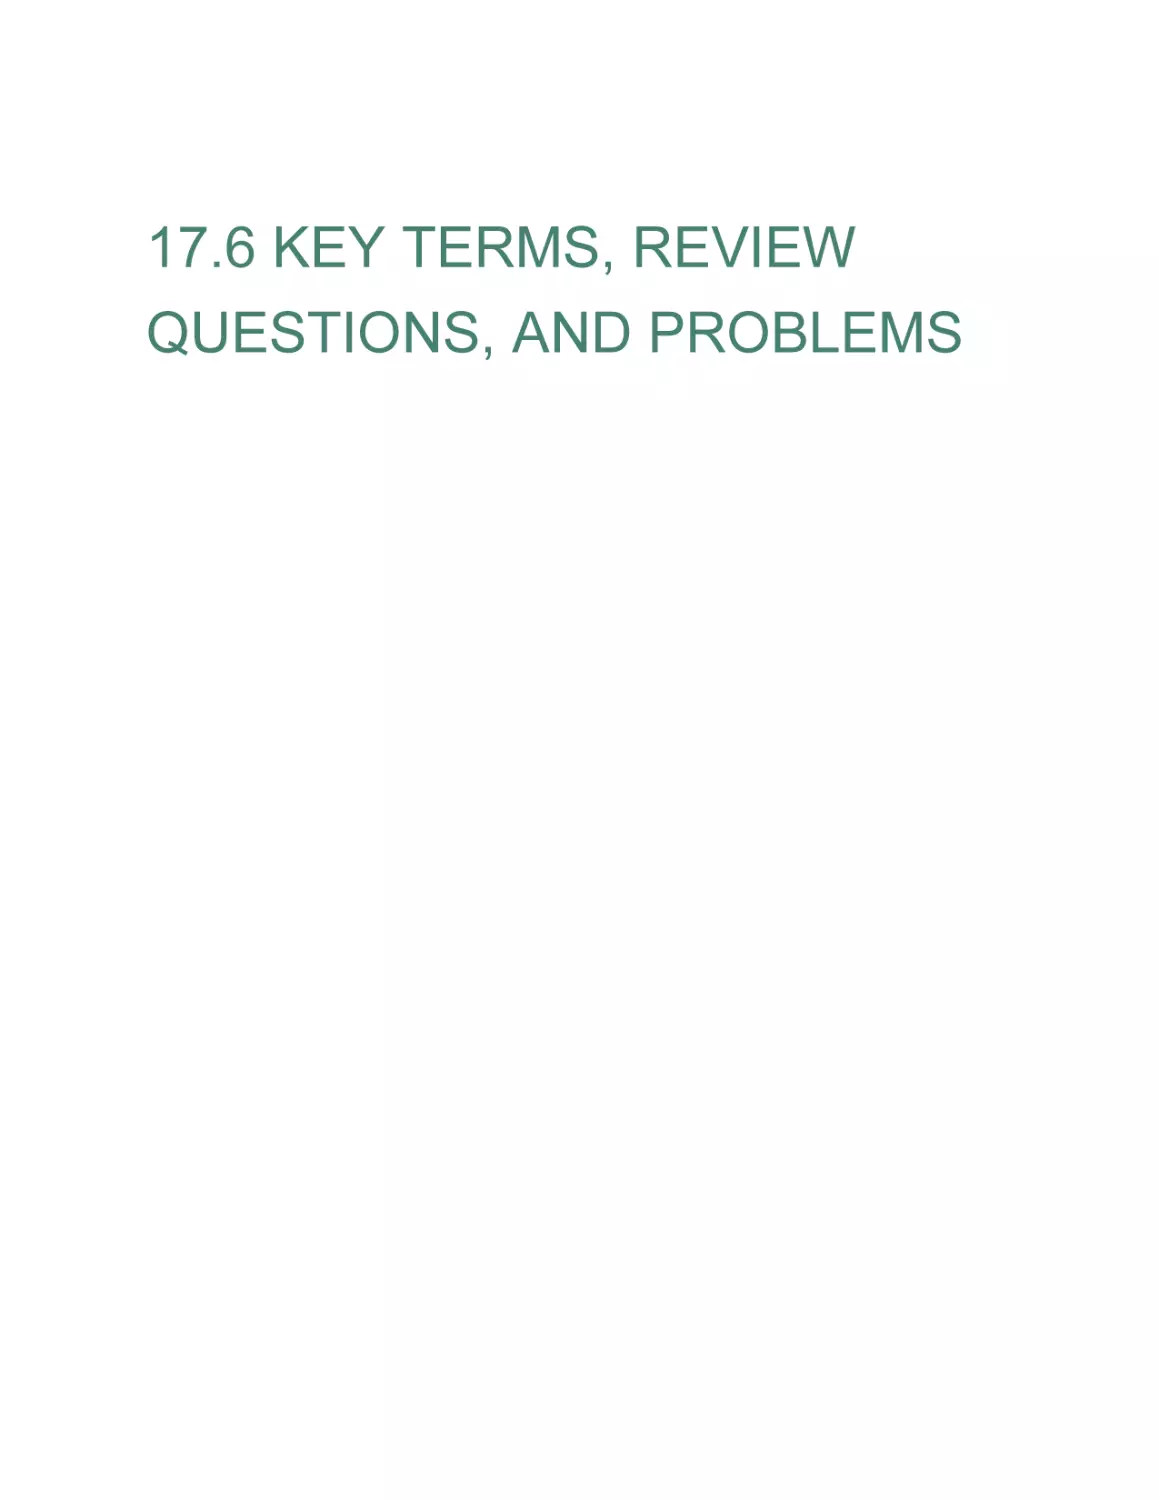 17.6 KEY TERMS, REVIEW QUESTIONS, AND PROBLEMS